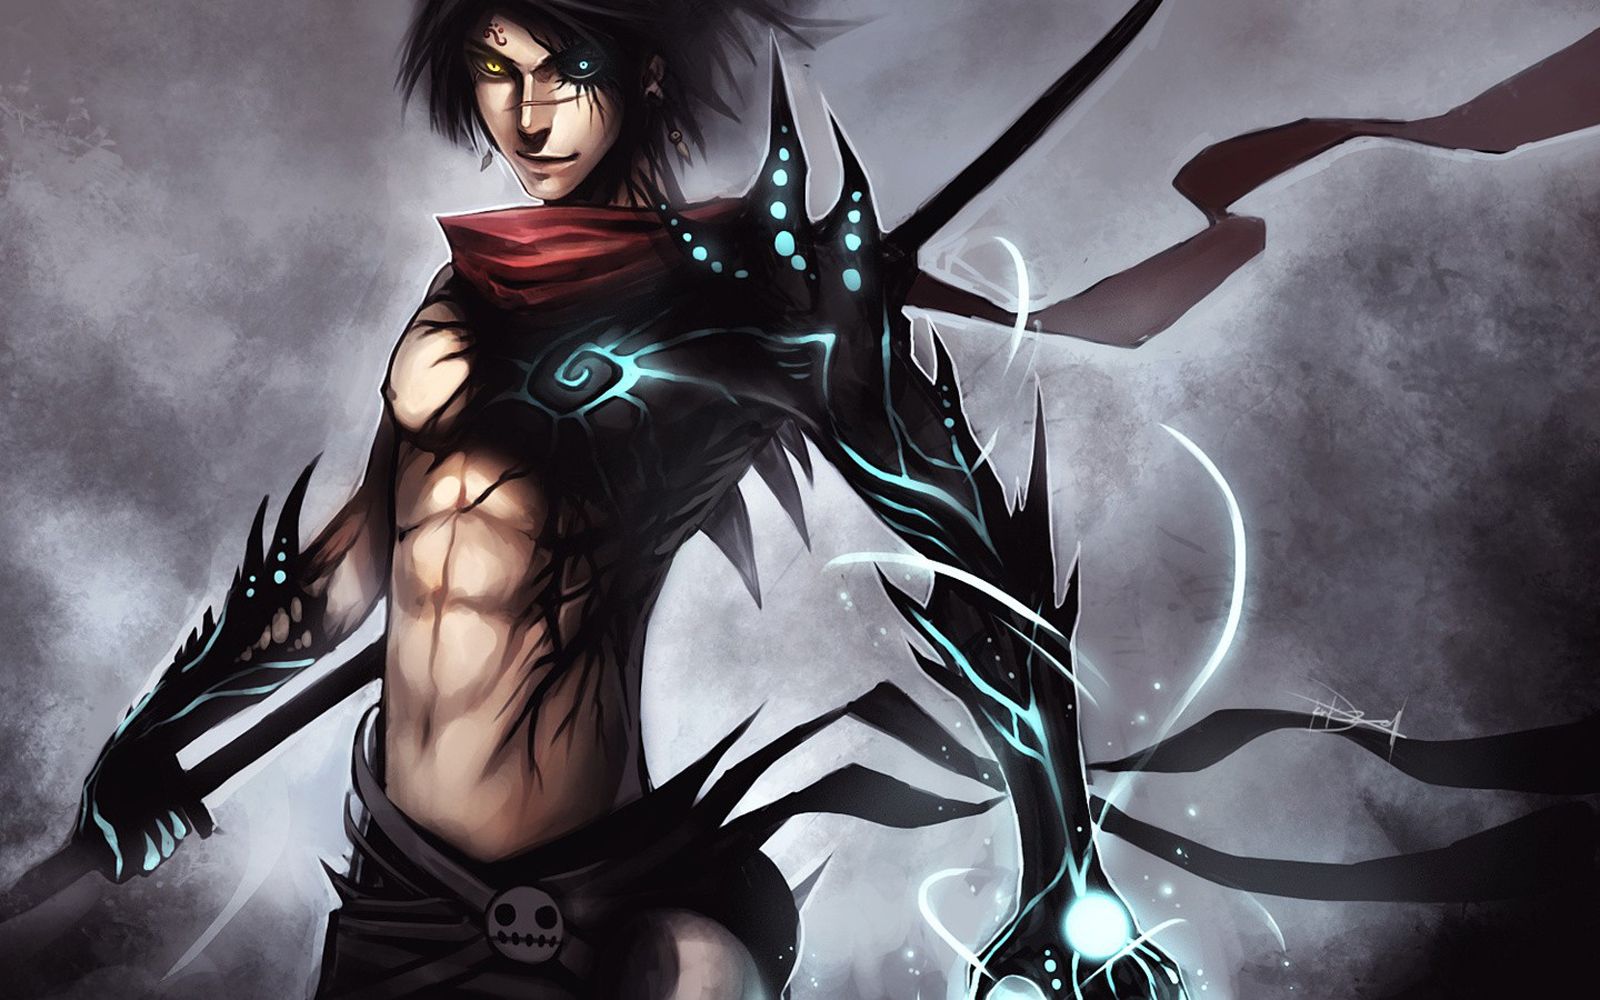 Free download Anime Male Warrior Weapon Scar d56 IVY Wallpapers.